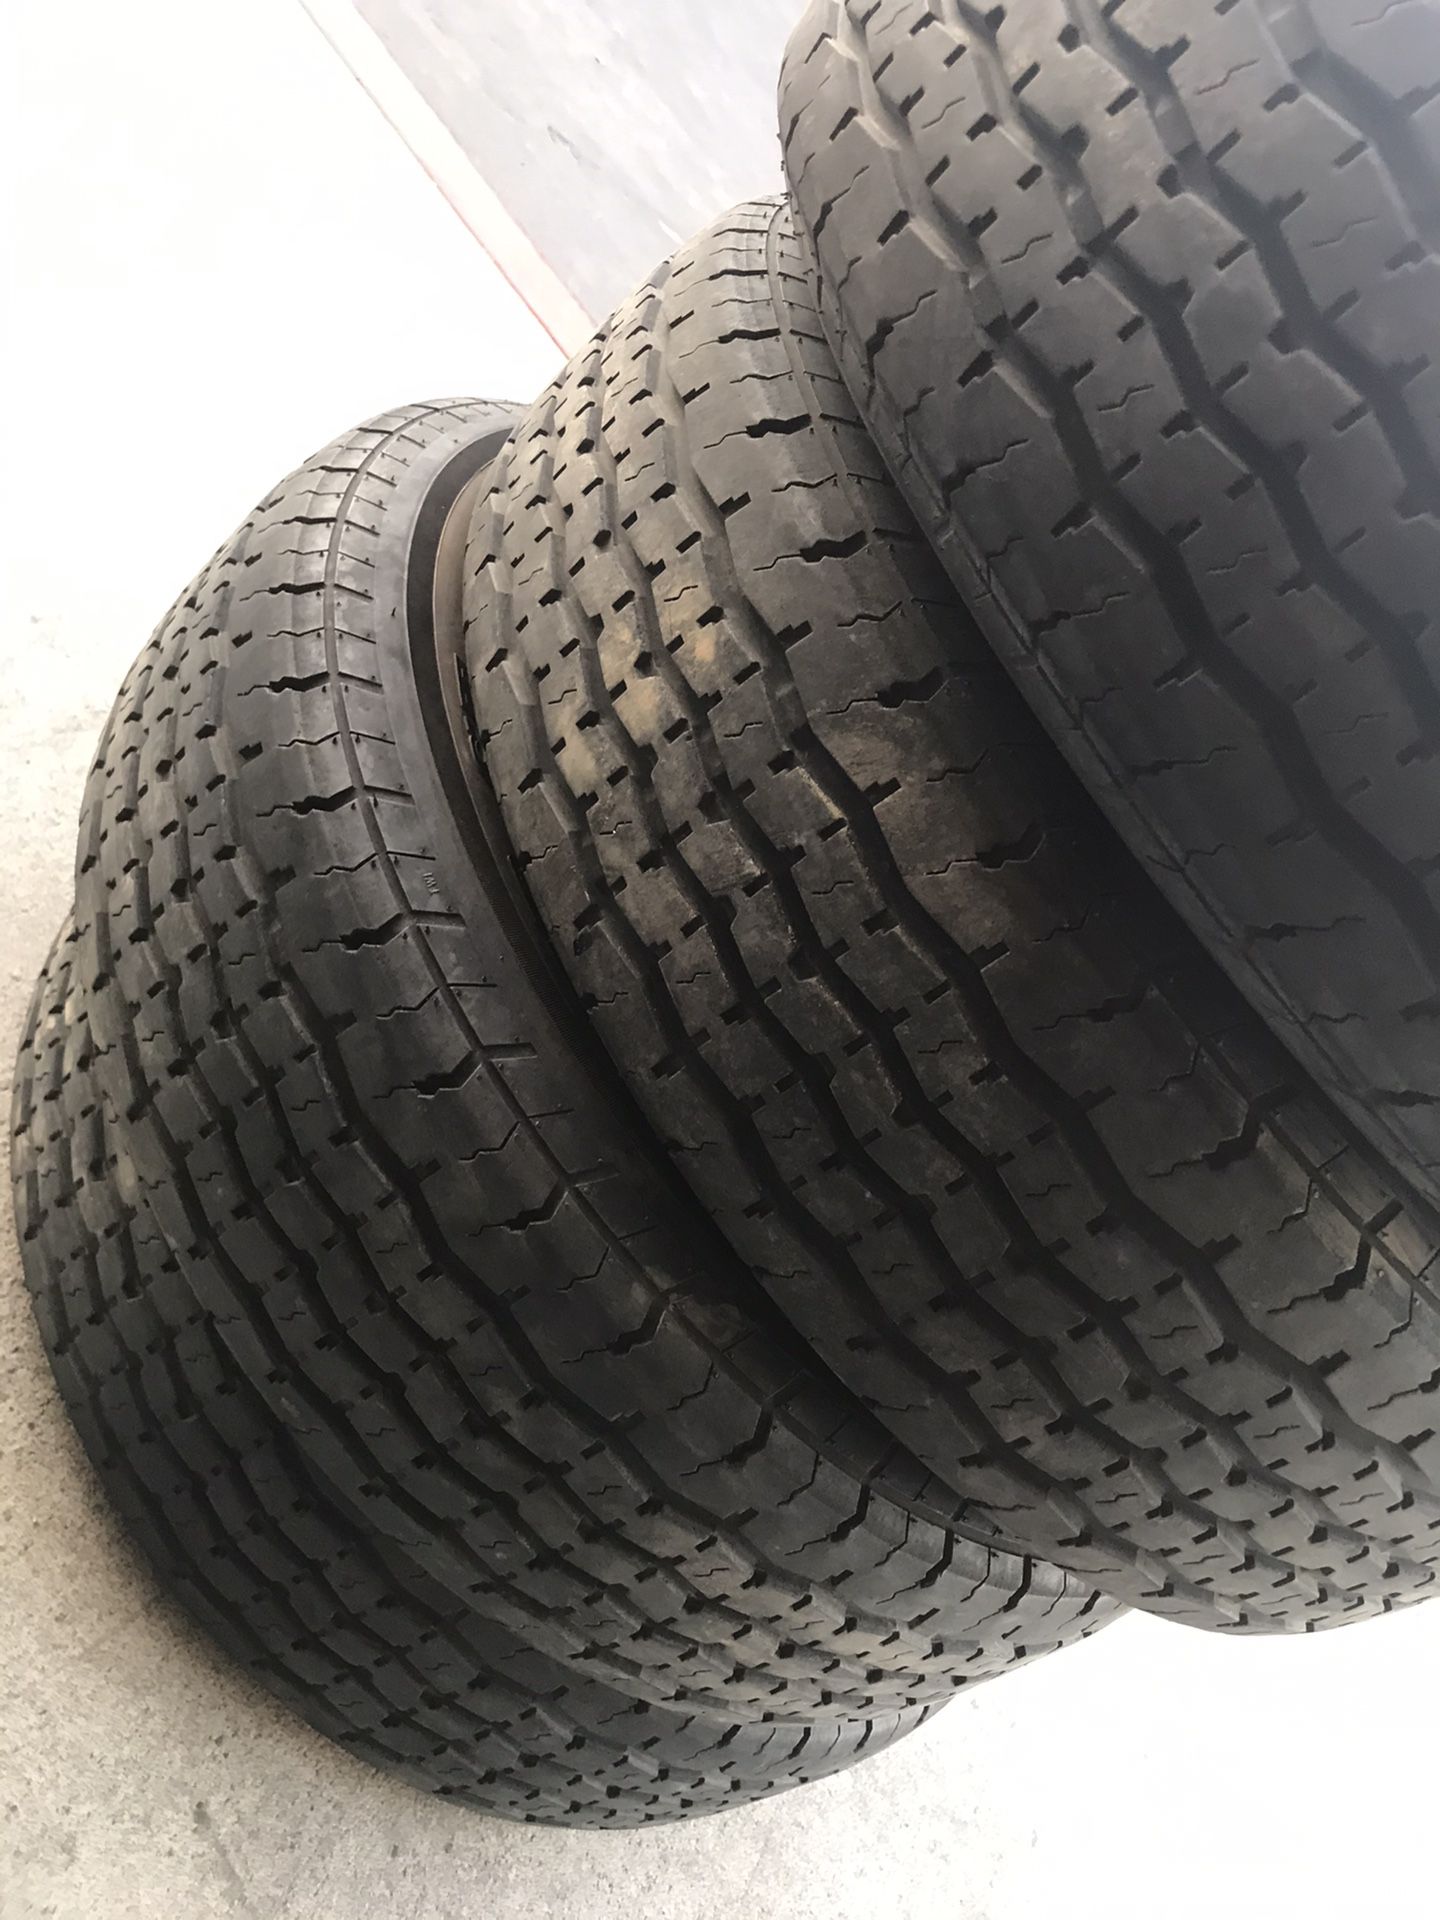 4x used trailer tire ST 205x75-14 $100 for 4. Good condition